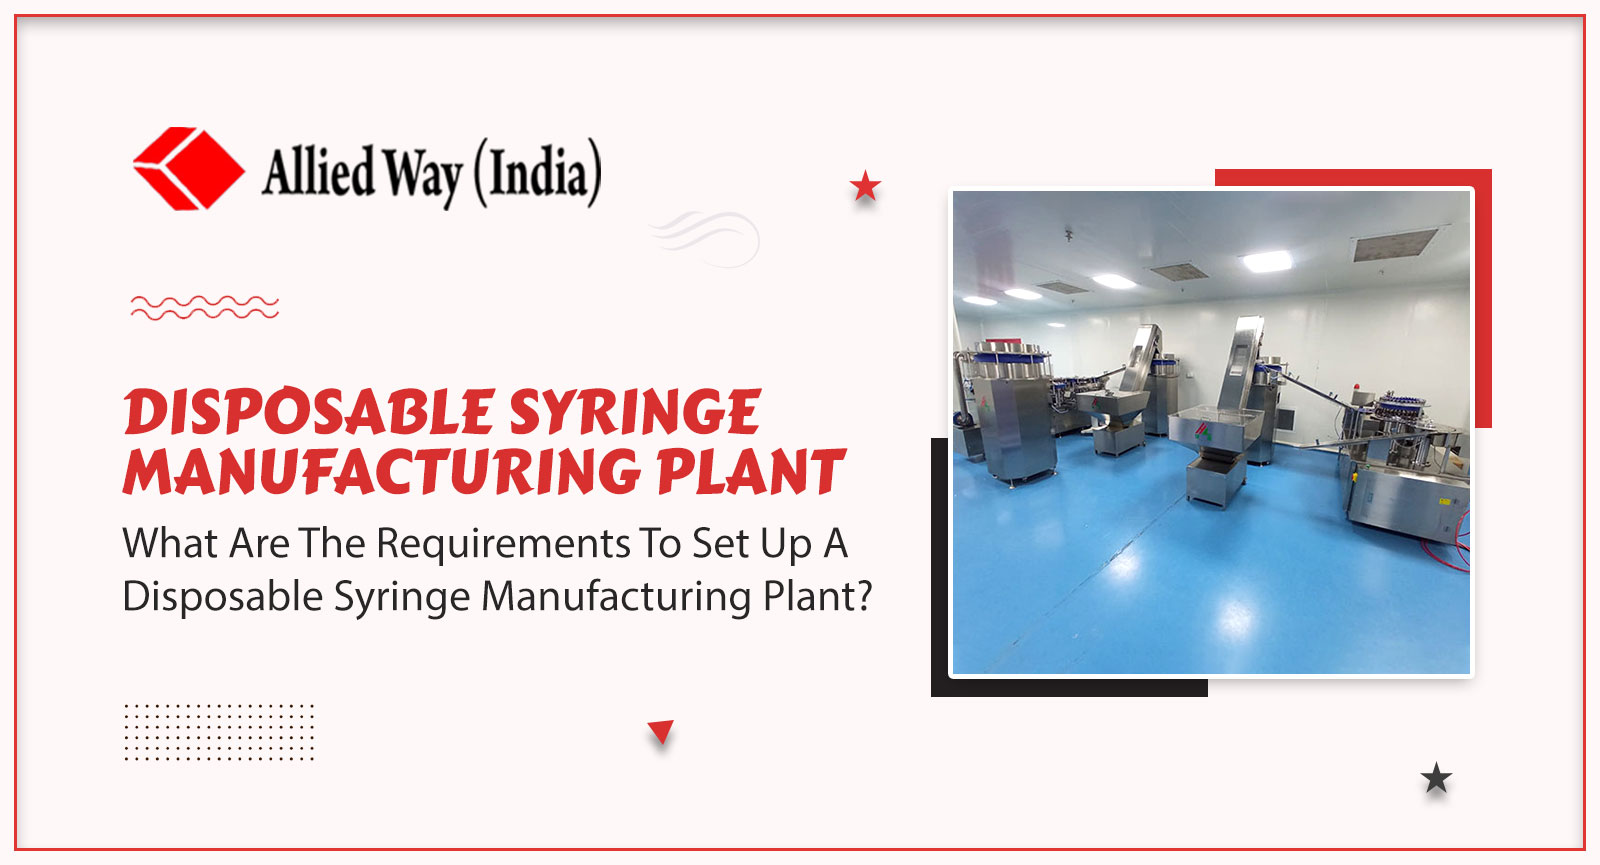 What Are The Requirements To Set Up A Disposable Syringe Manufacturing Plant?, Allied Way (India)